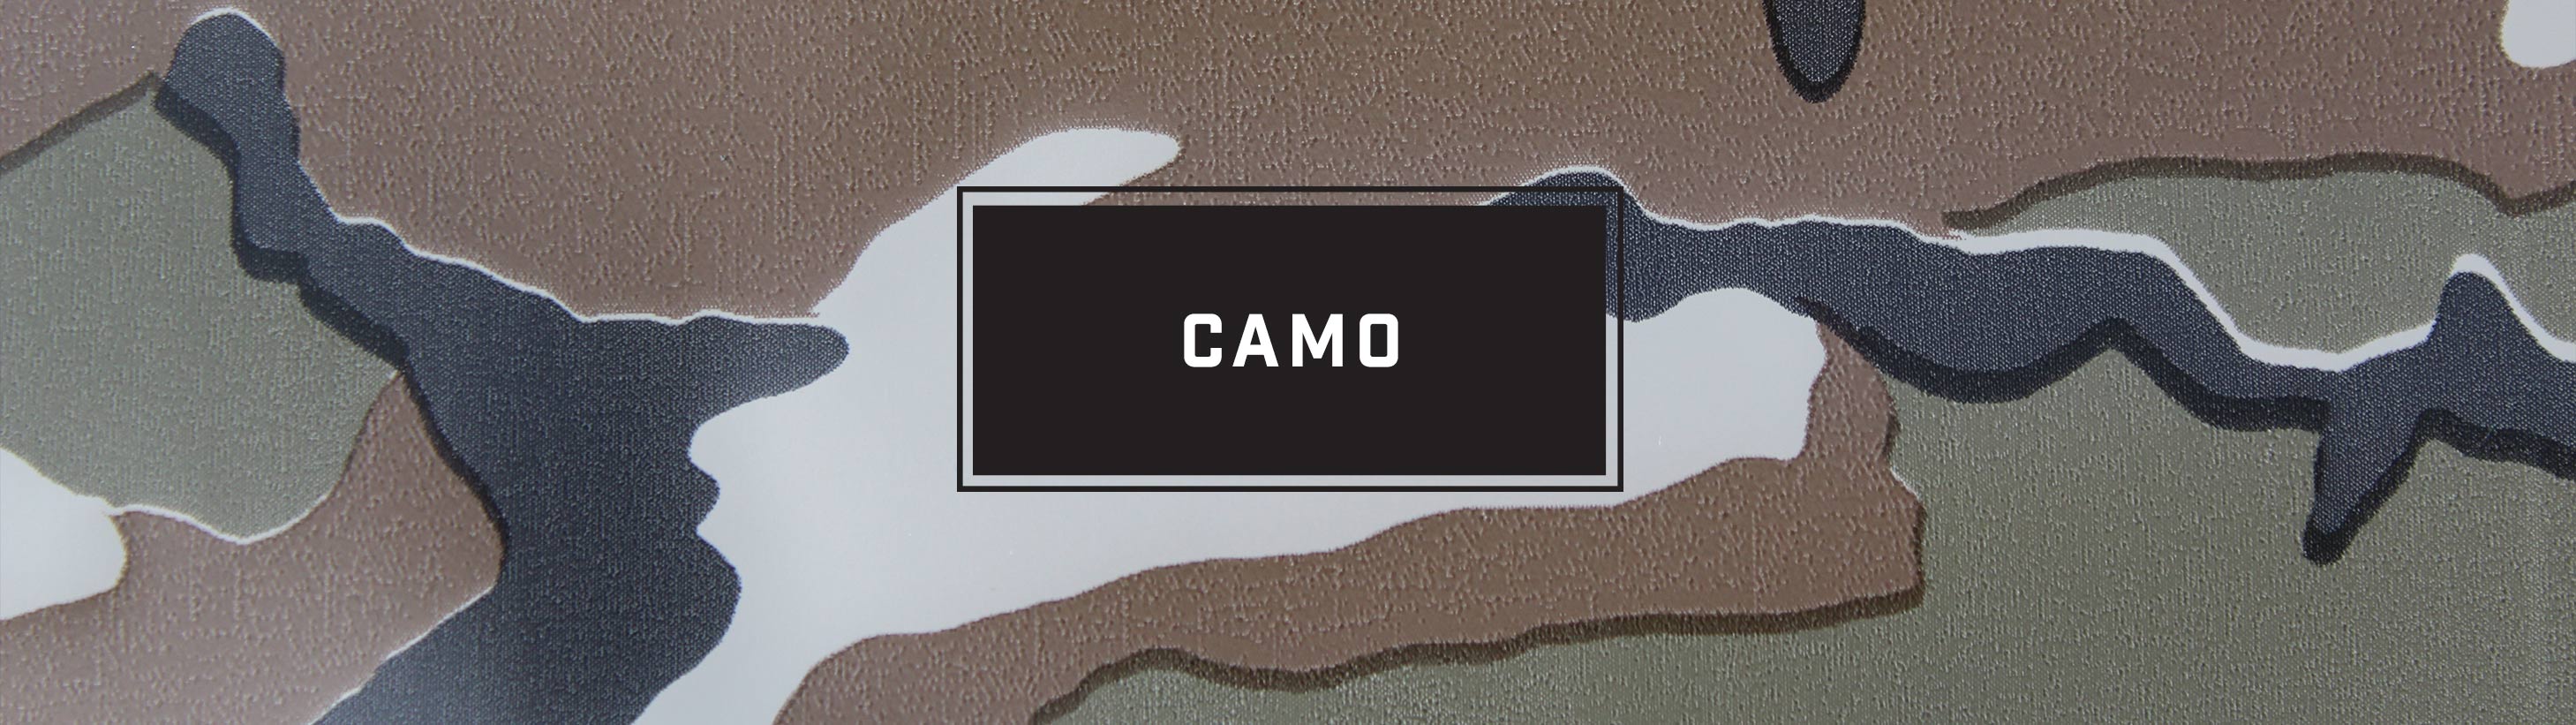 Featured Product: Camo